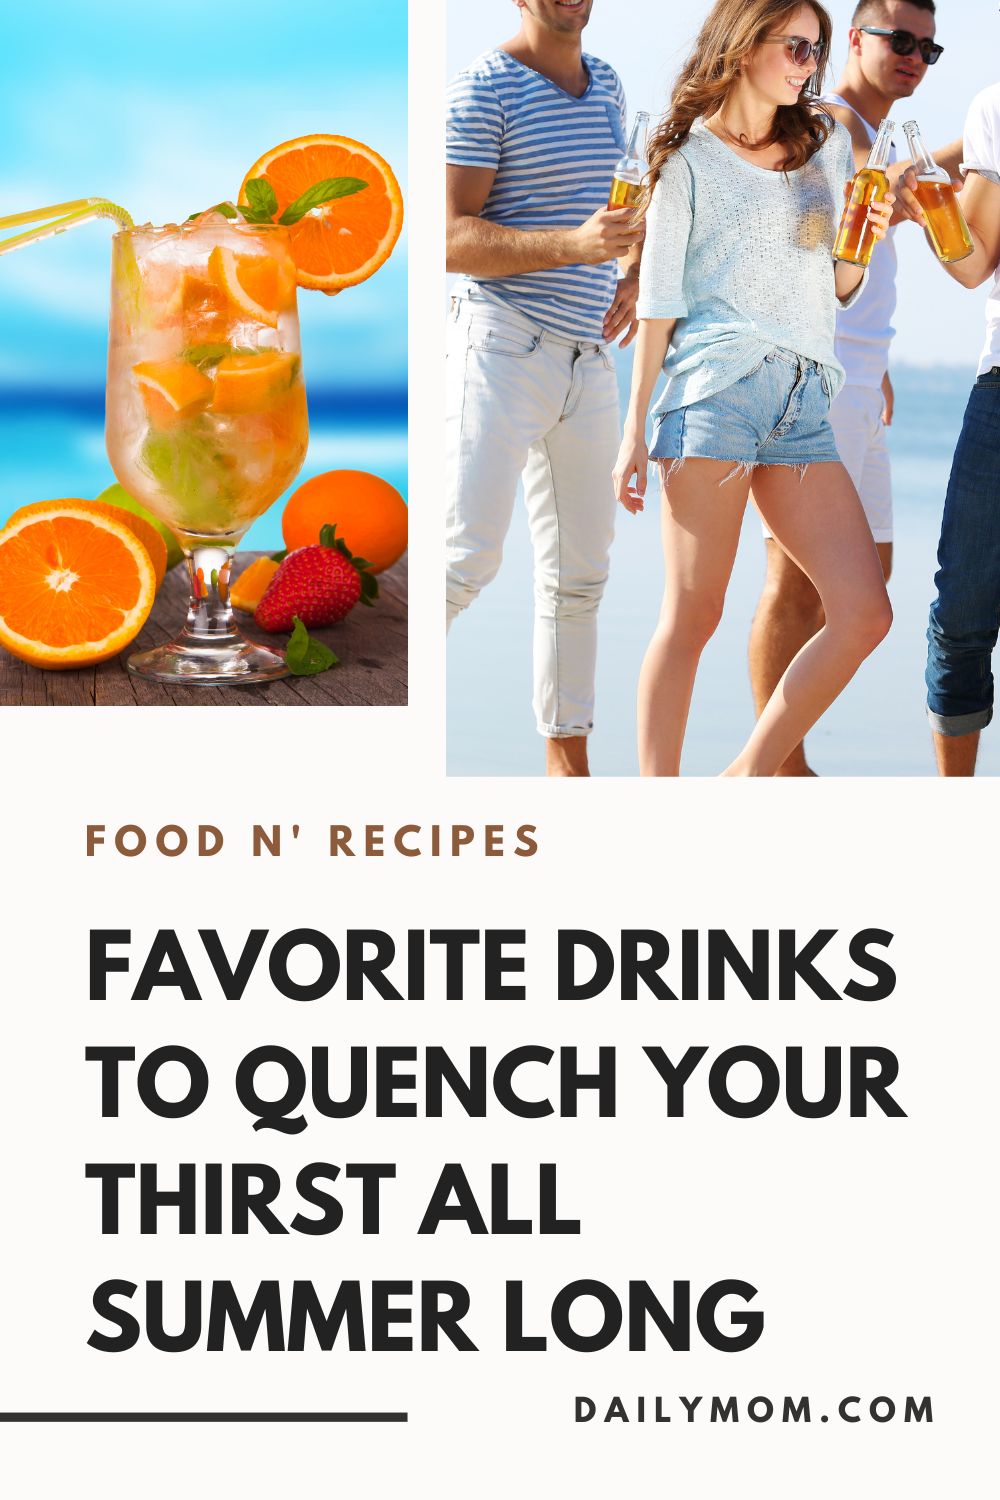 25 Favorite Drinks To Quench Your Thirst This Summer